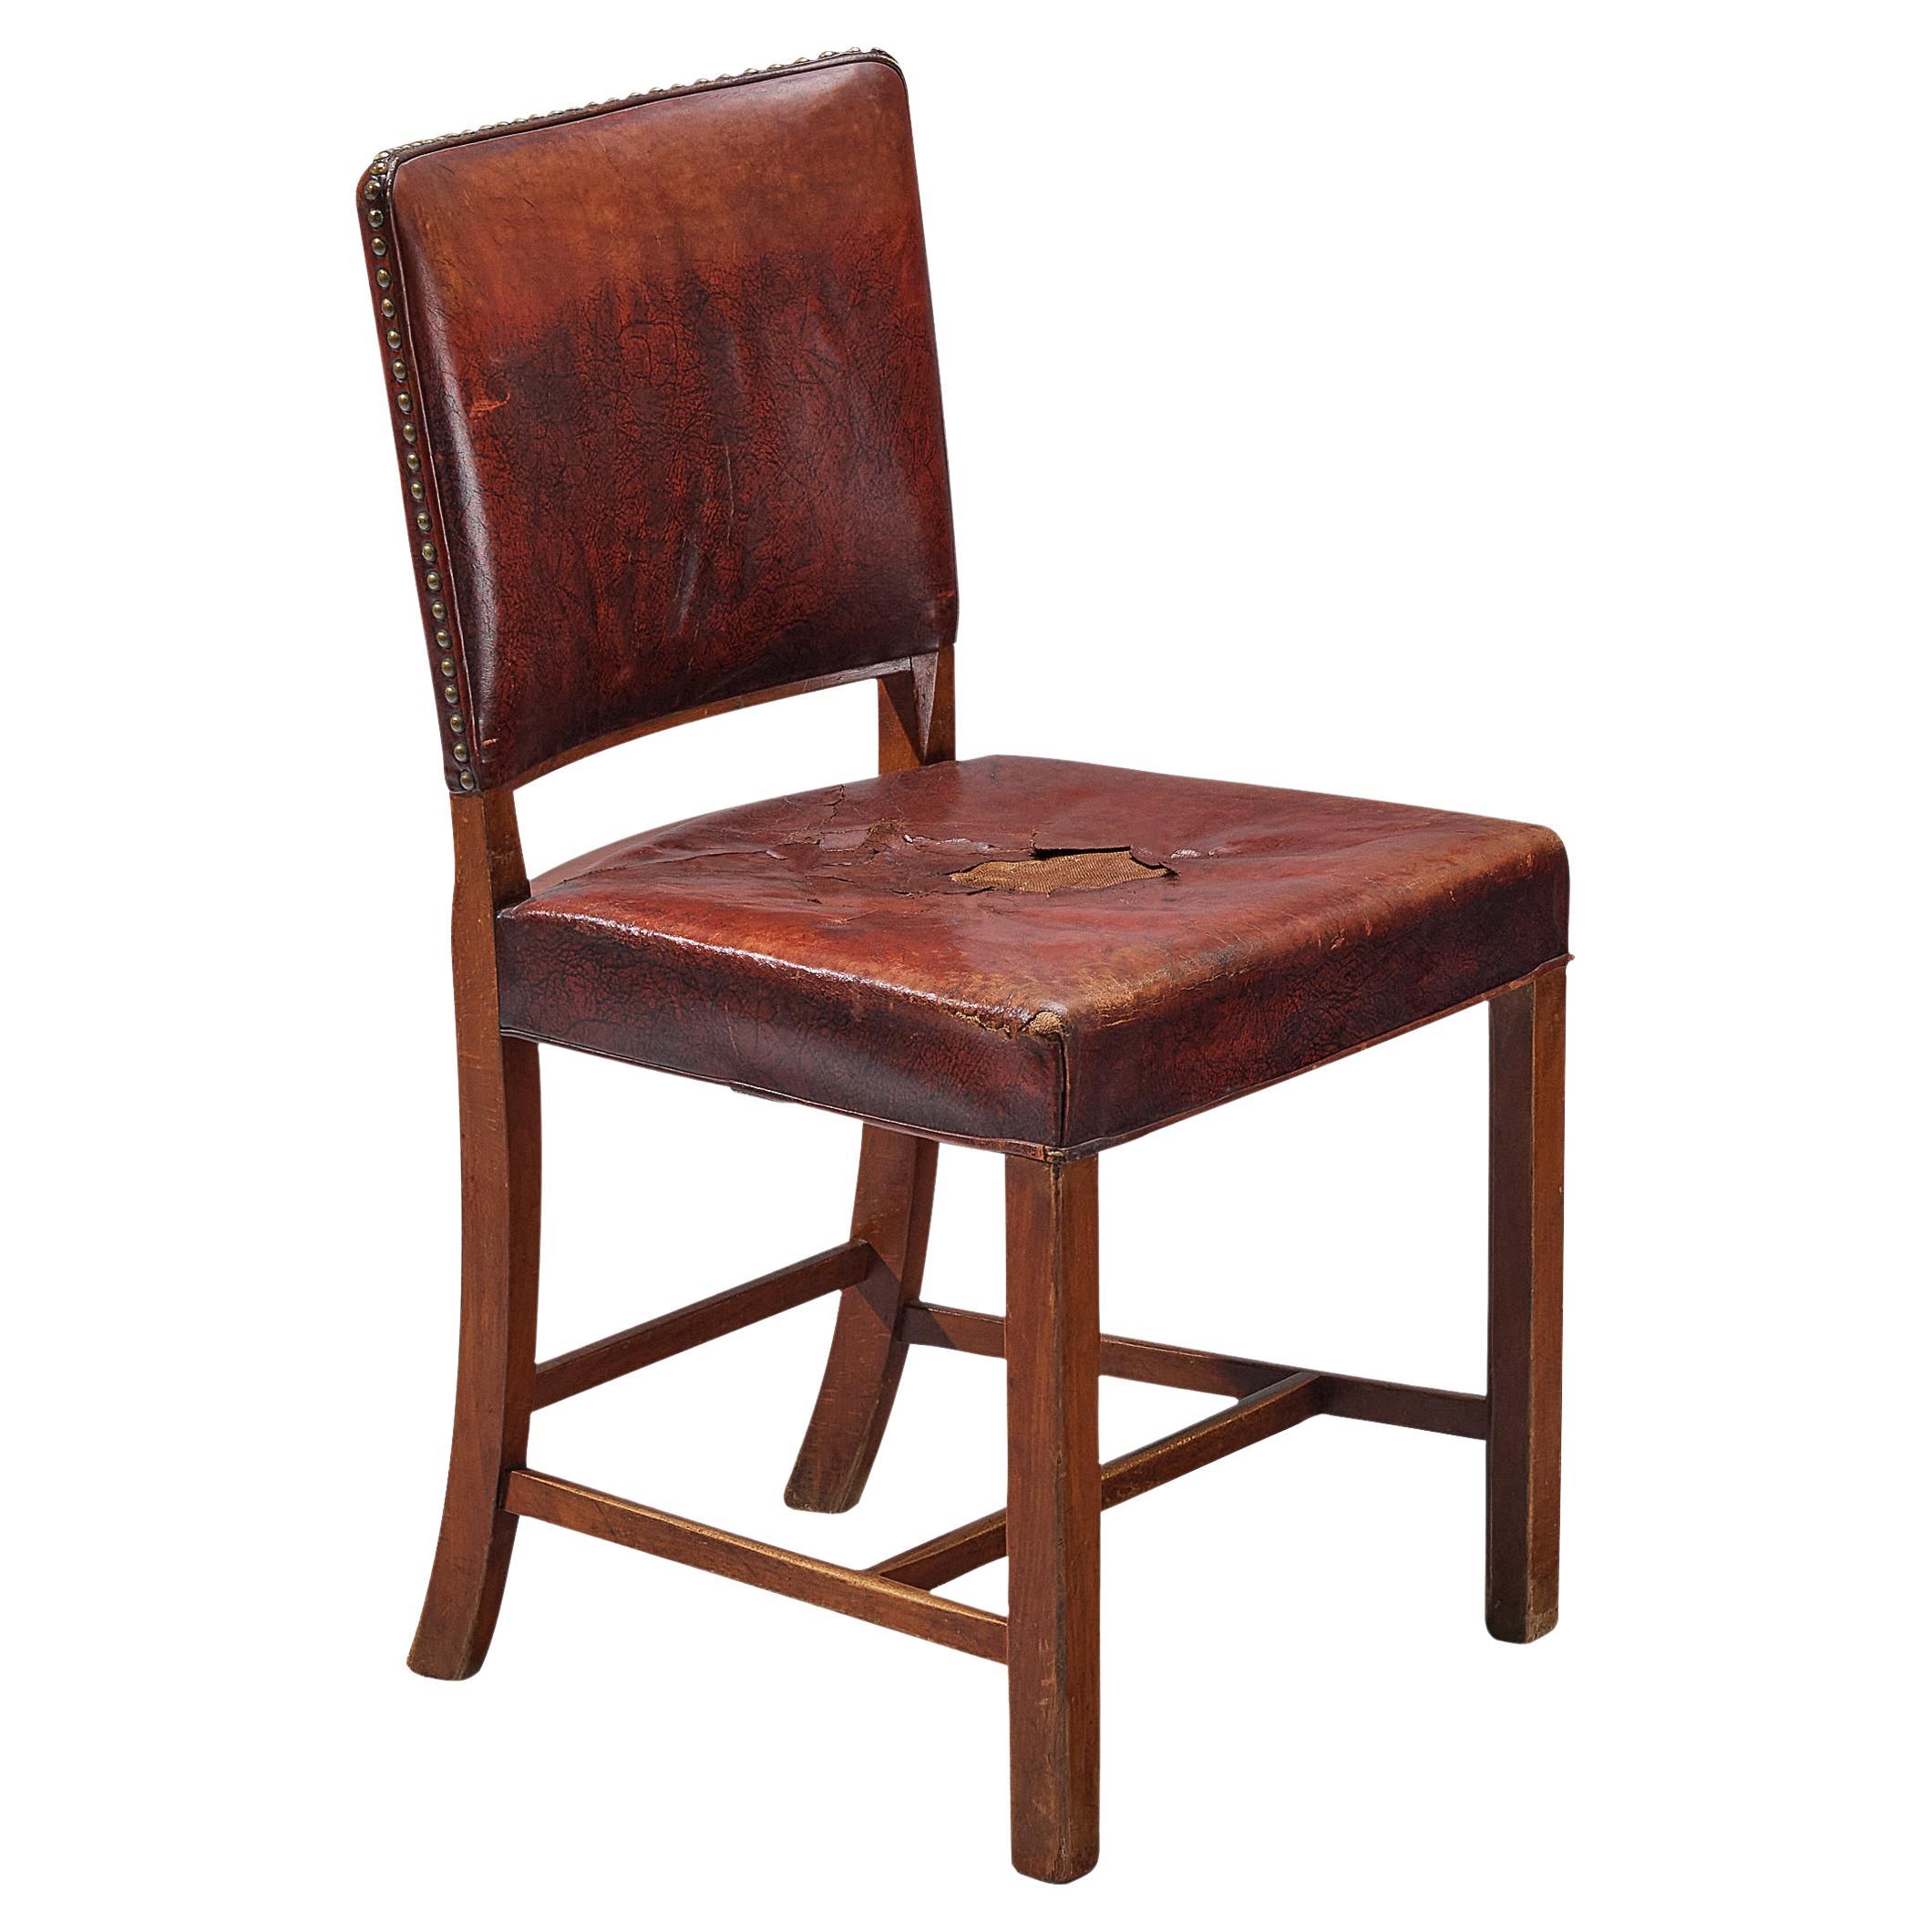 Early Fritz Hansen Dining Chair in Original Patinated Leather